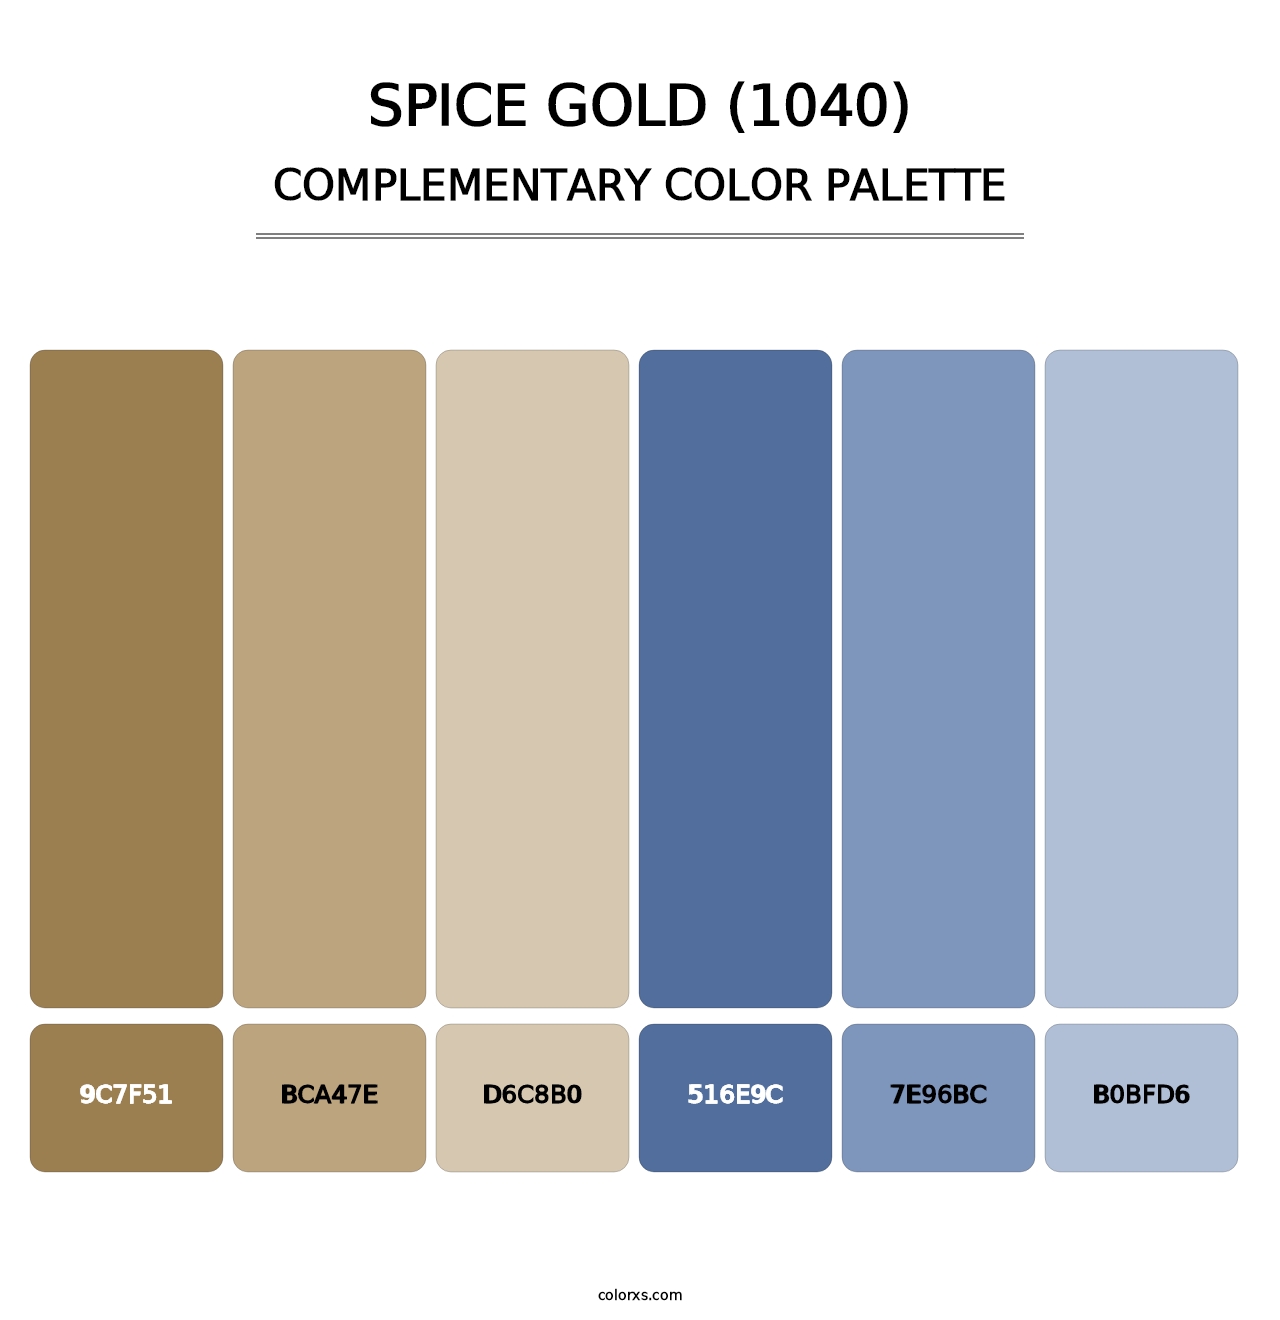 Spice Gold (1040) - Complementary Color Palette